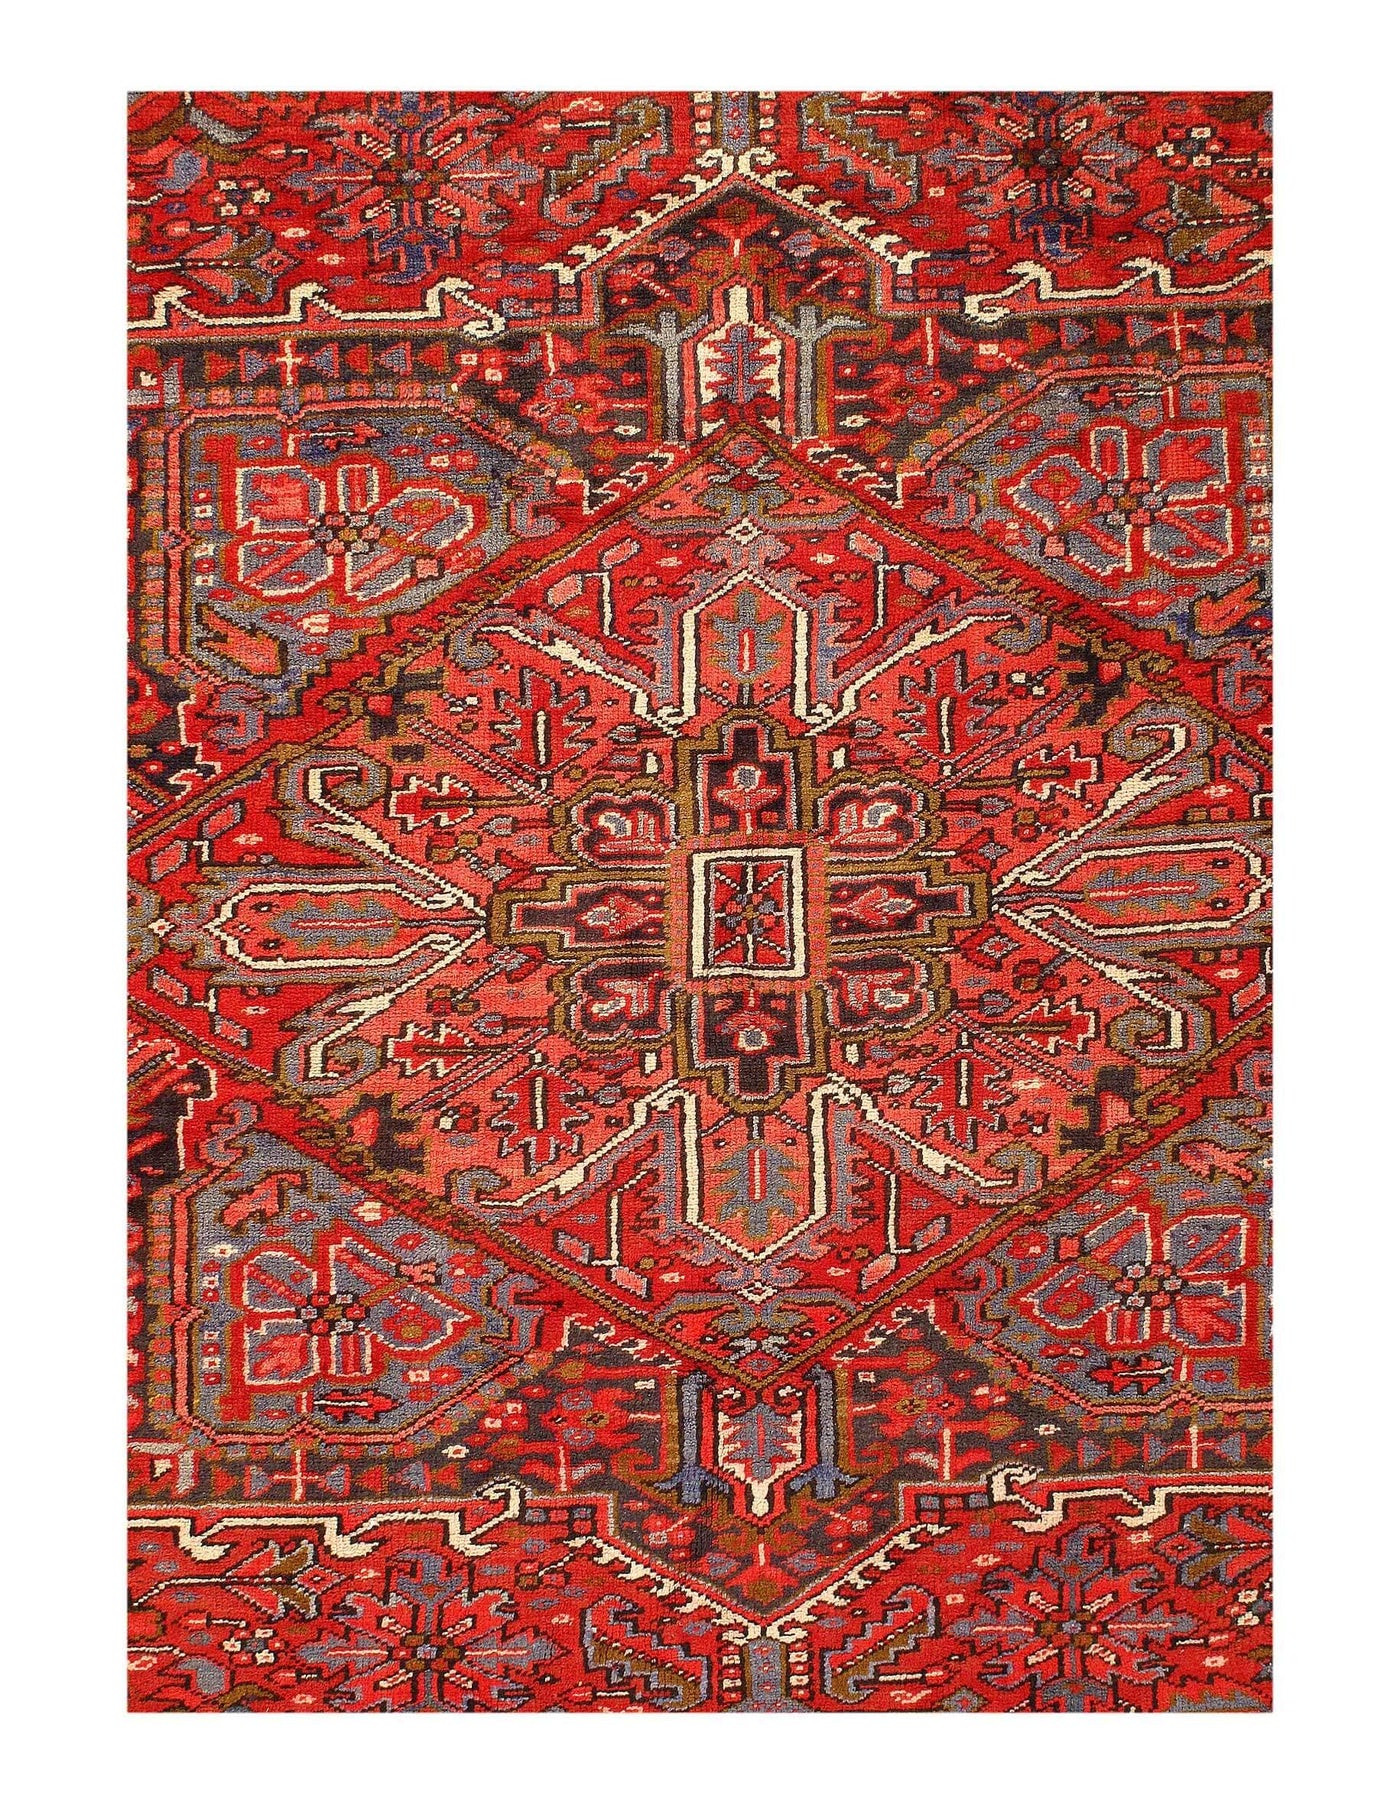 Canvello Antique Persian Heriz Large Wool Rug - 9'6'' X 12'7''